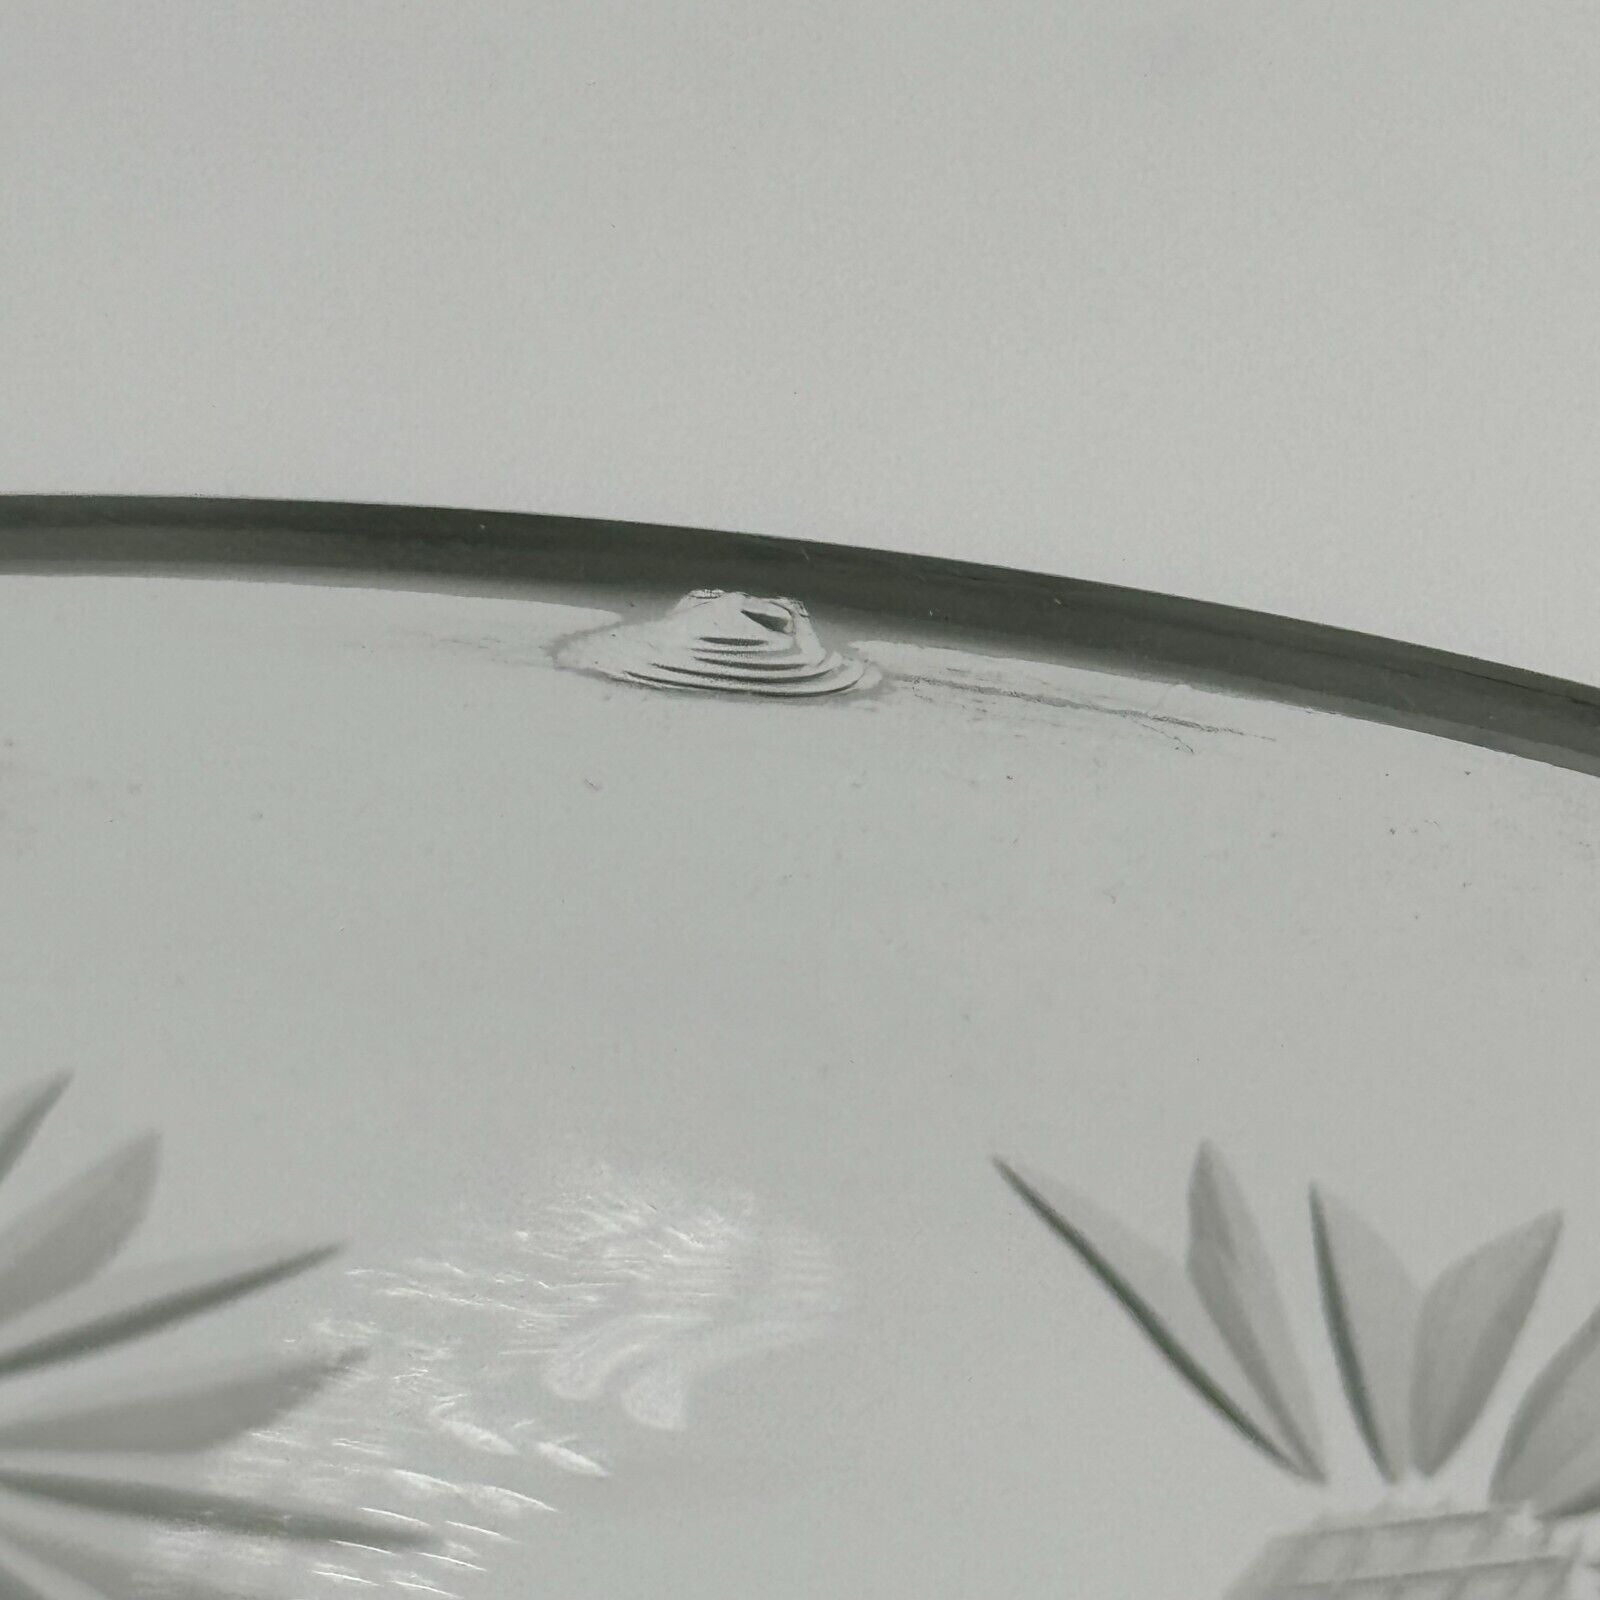 Colony Mid Century Large 8”Crystal Bowl White Frosted Floral Design - Small Chip